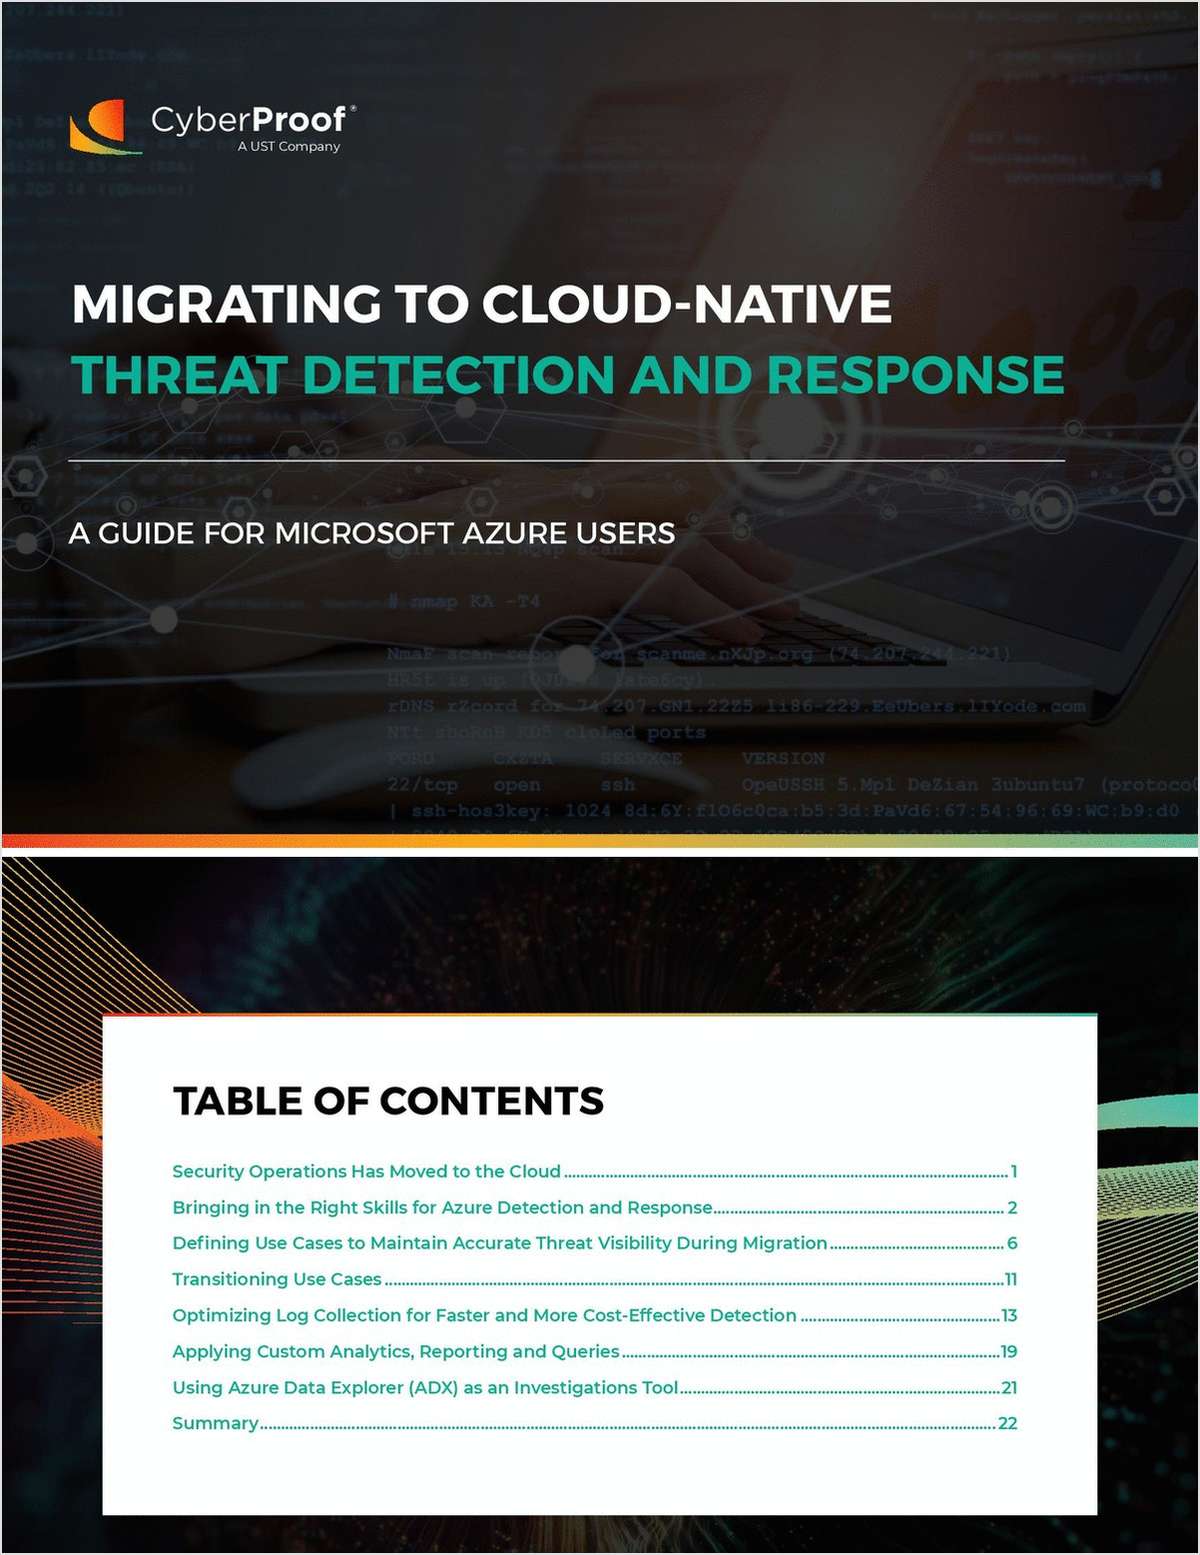 Migrating to Cloud-Native Threat Detection and Response